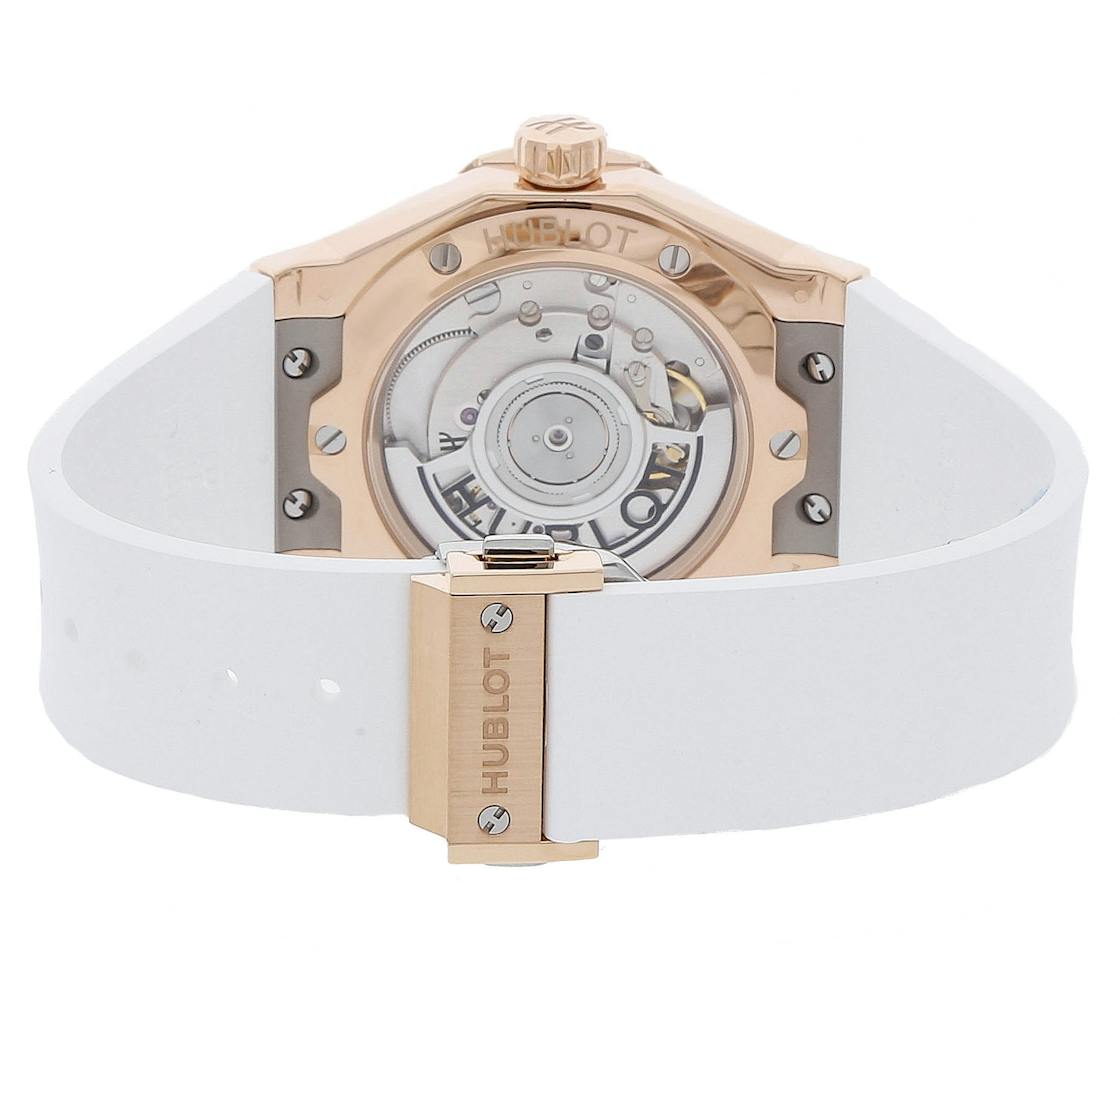 Hublot Men's Classic Fusion Orlinski King Gold Watch in White, Rose Gold, Automatic | Govberg 550.OS.2200.RW.ORL20